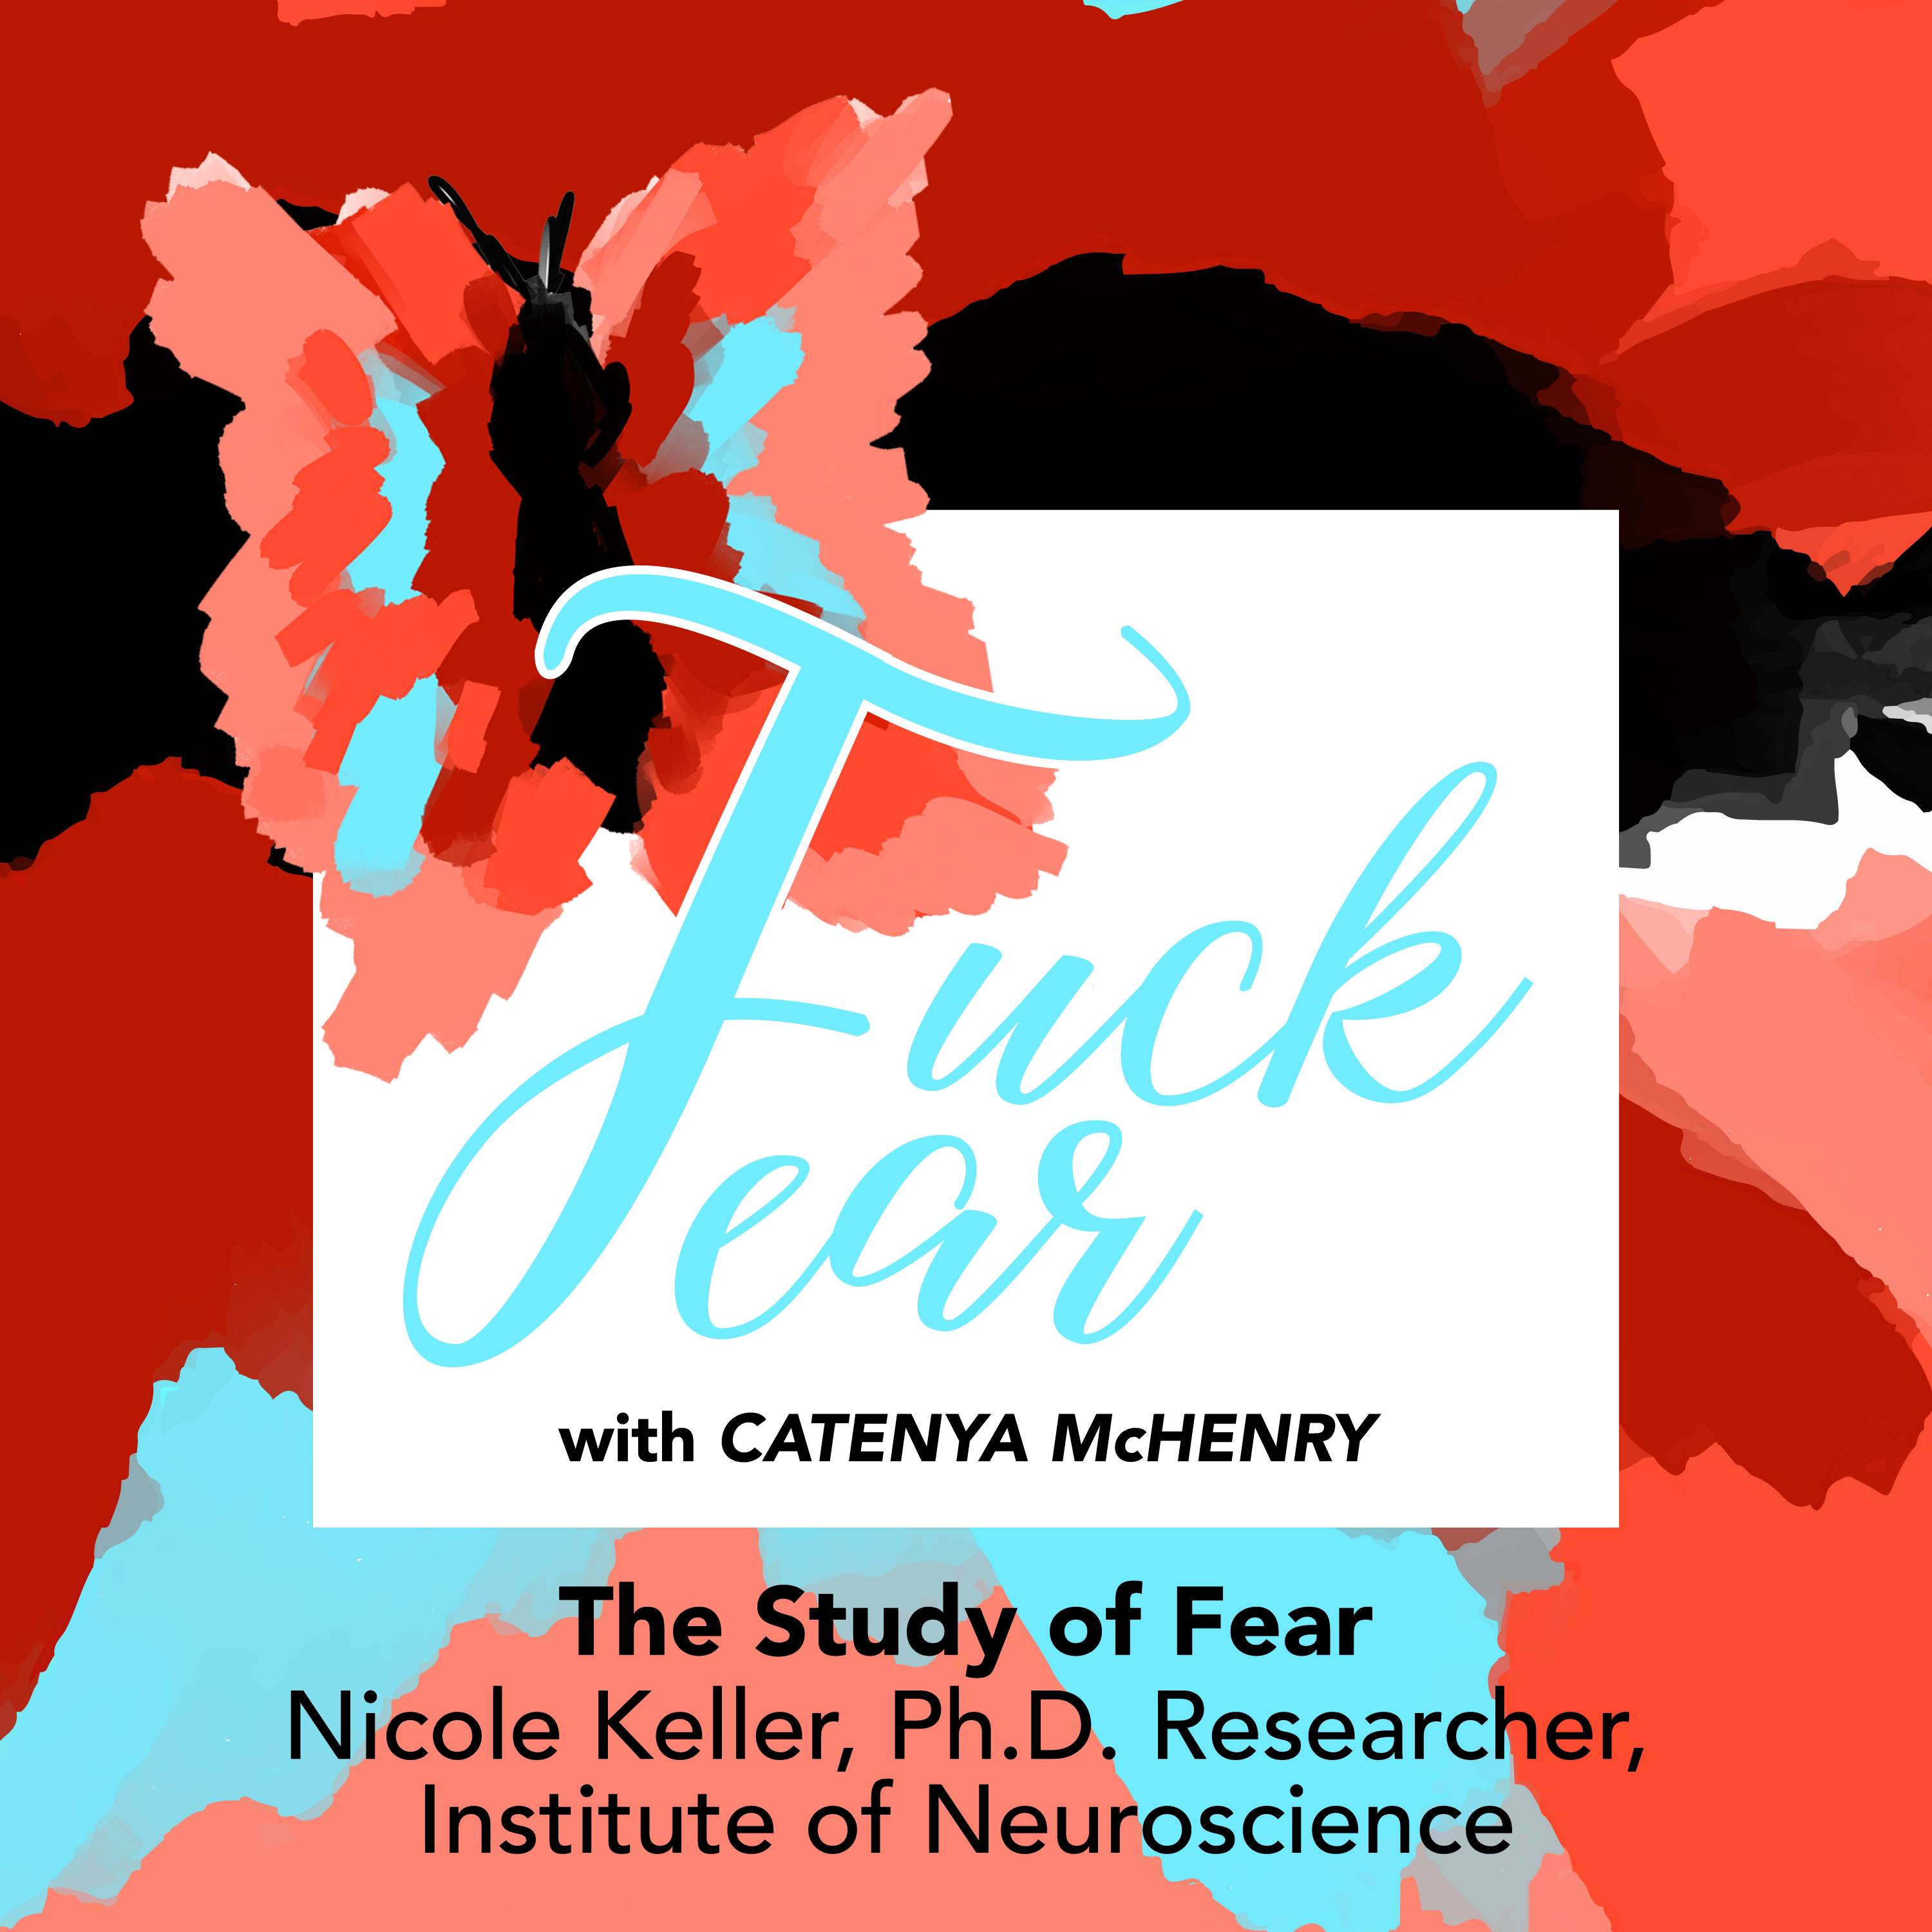 The Study of Fear with Catenya McHenry